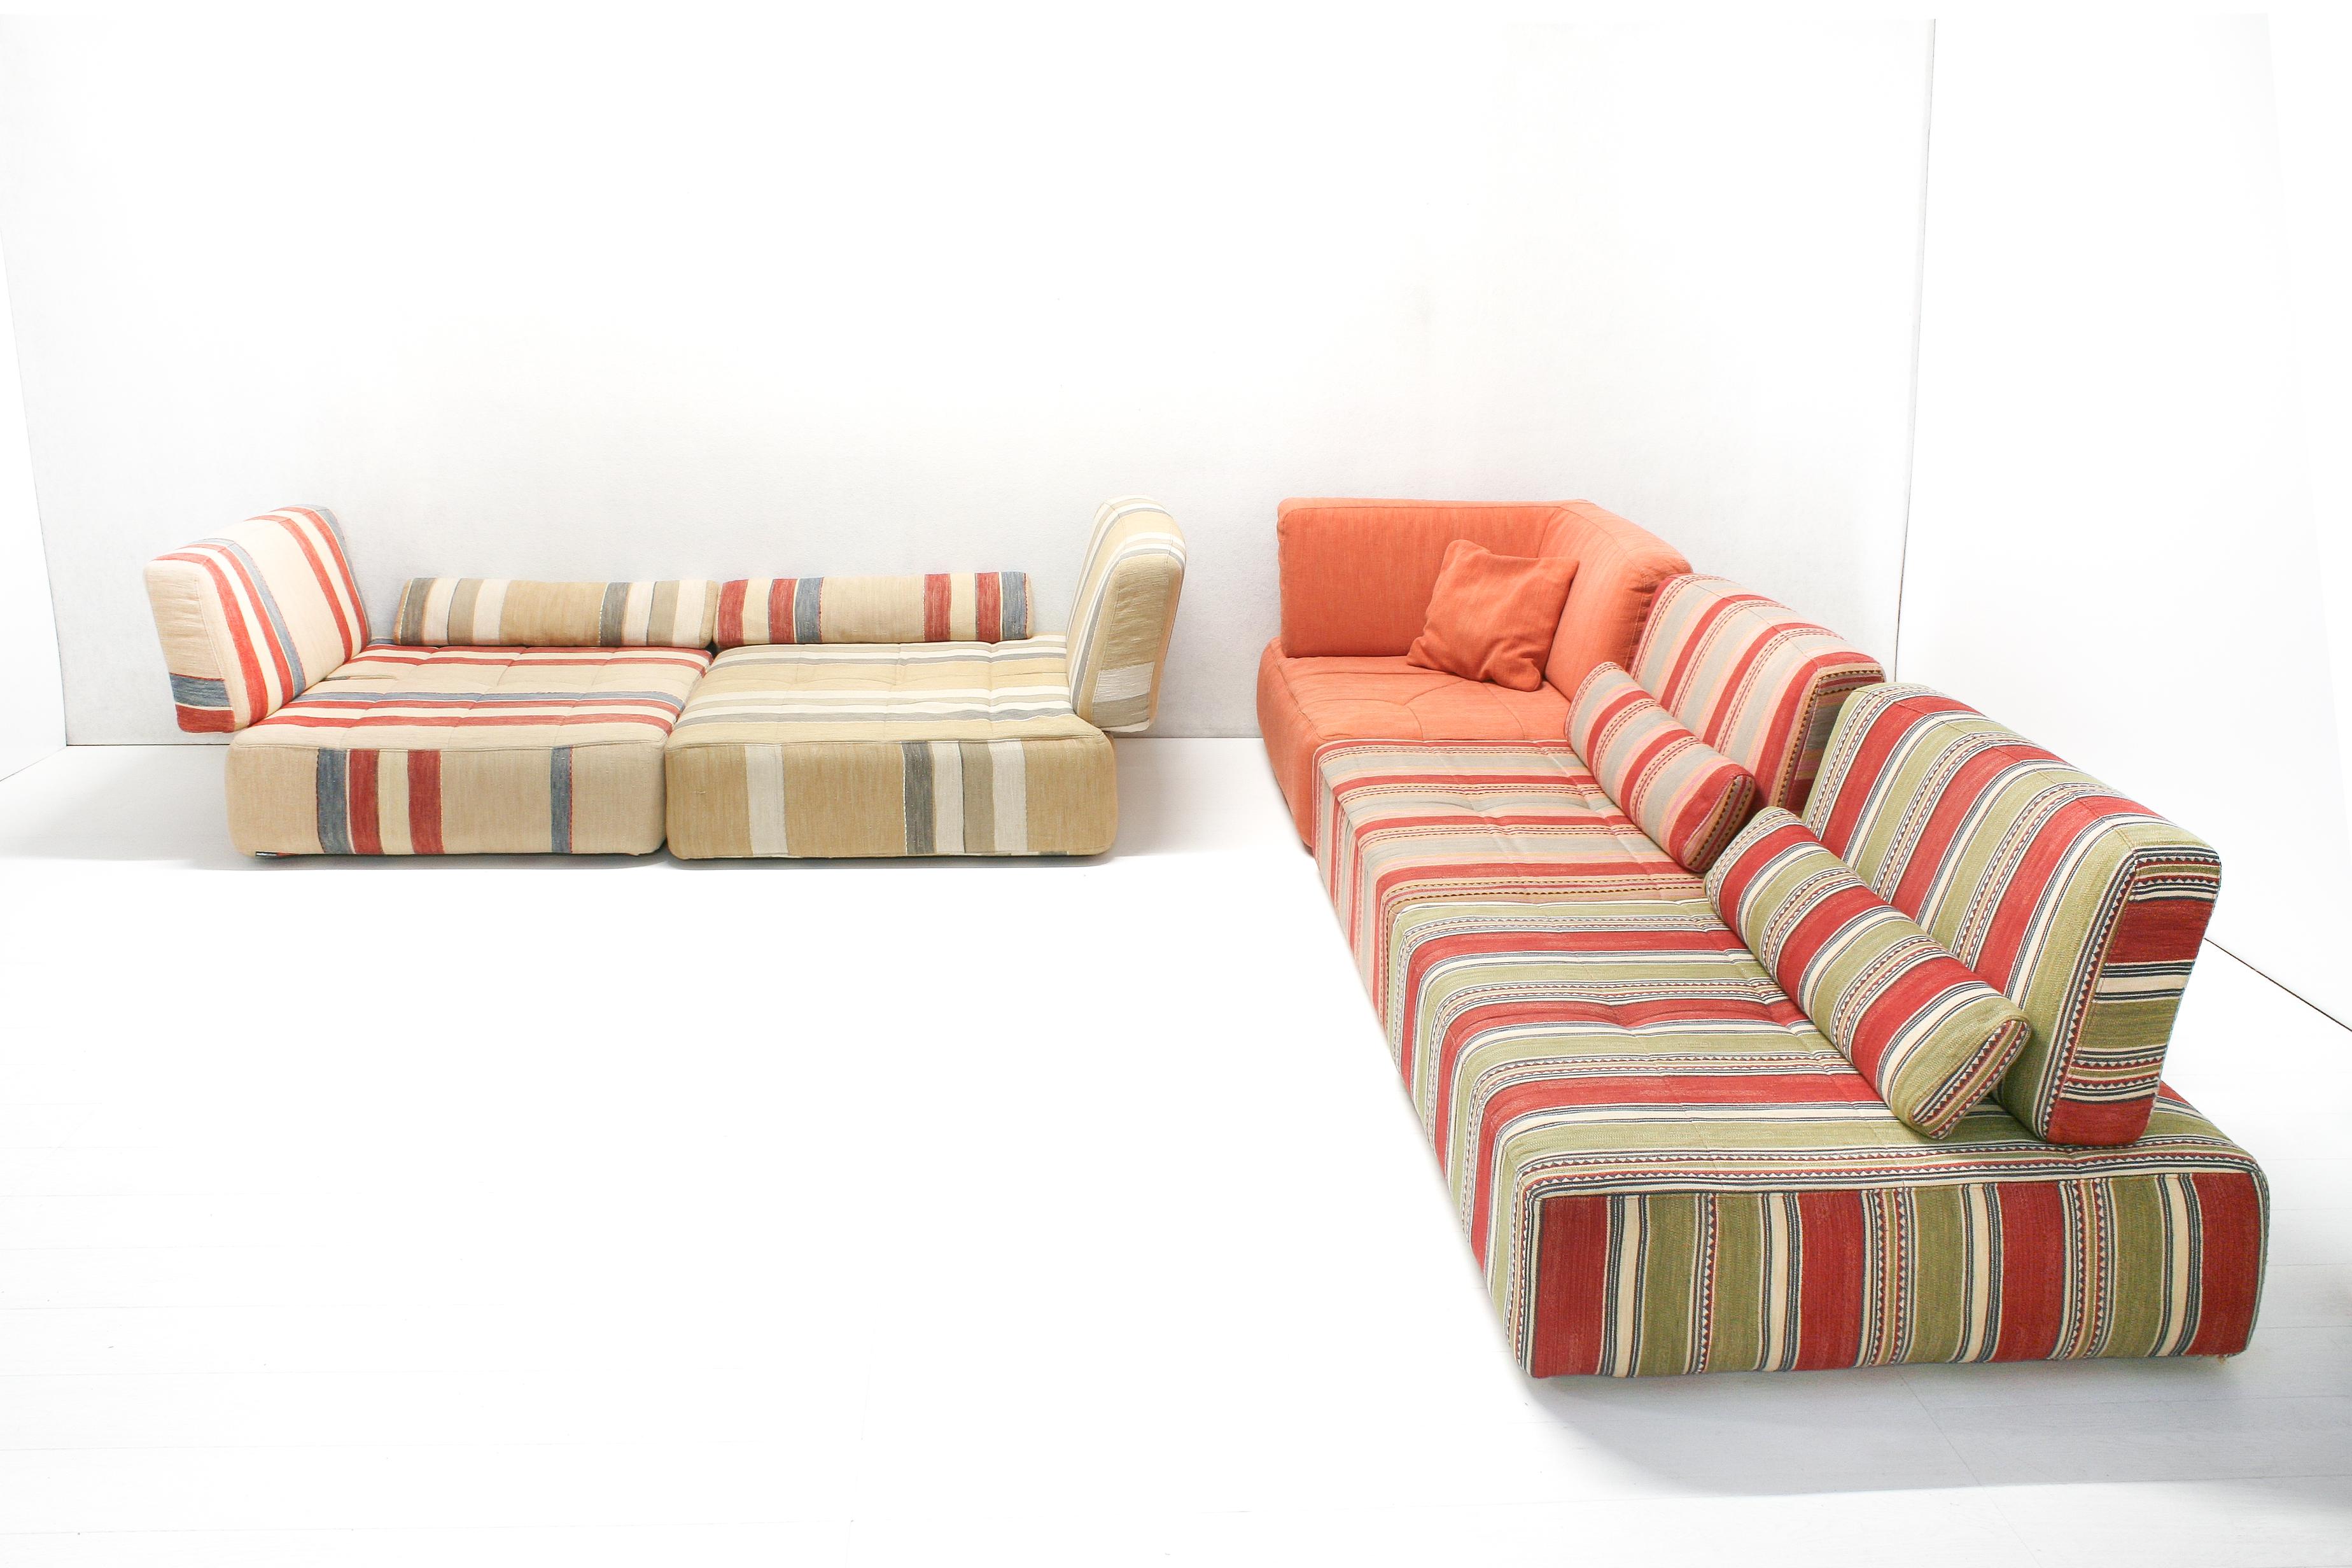 Modular Parcours Voyage Immobile Fabric Sofa by Sacha Lakic for Roche Bobois In Good Condition In Izegem, VWV